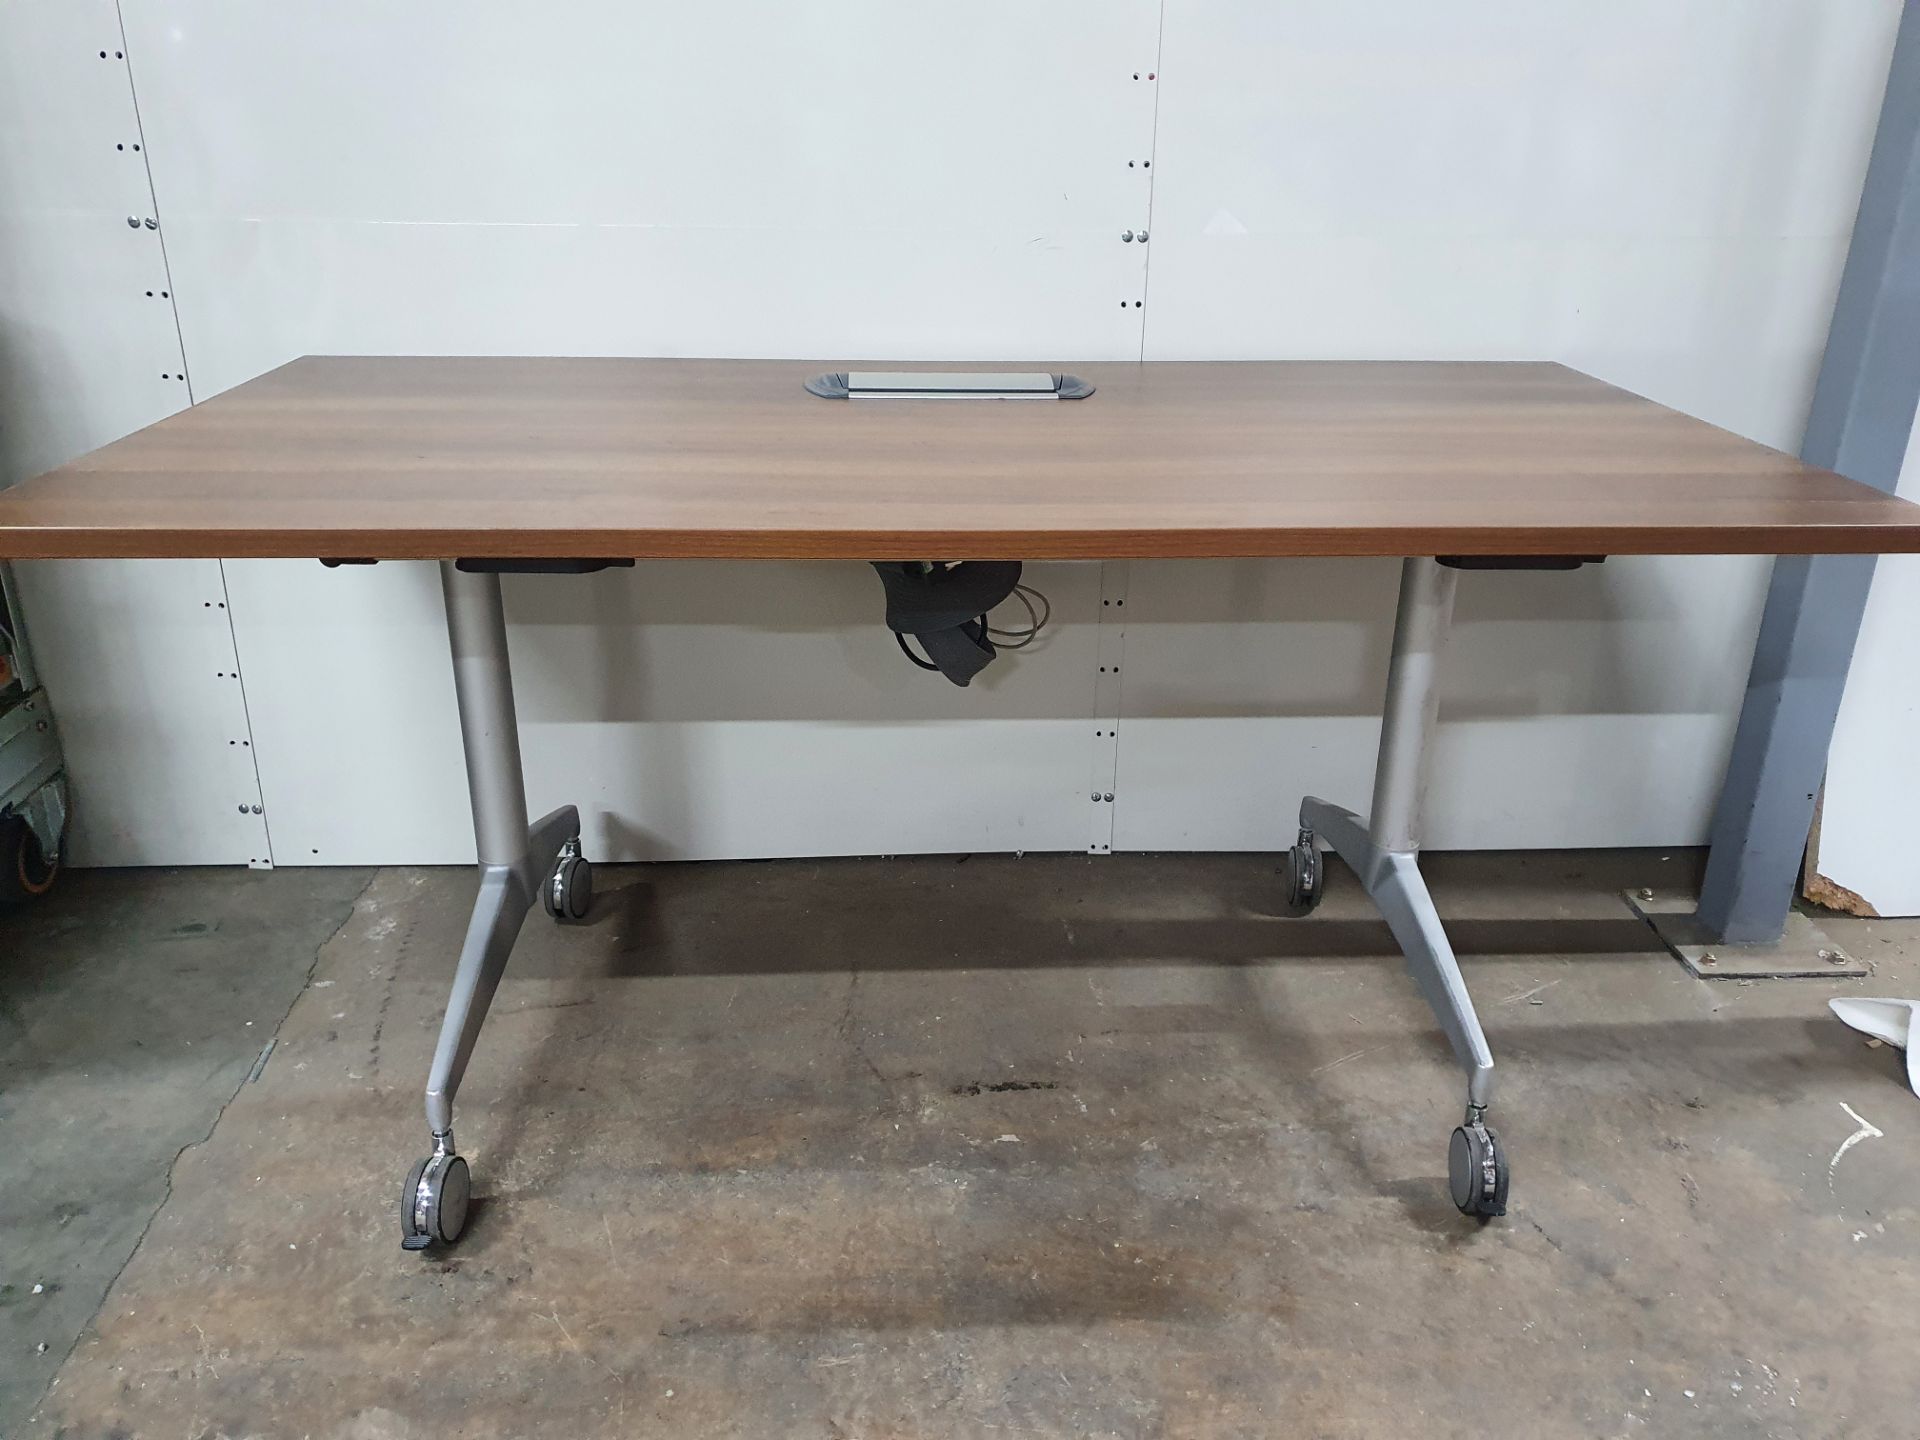 Wooden Desk with 3 pin power sockets and ethernet port - Image 2 of 5